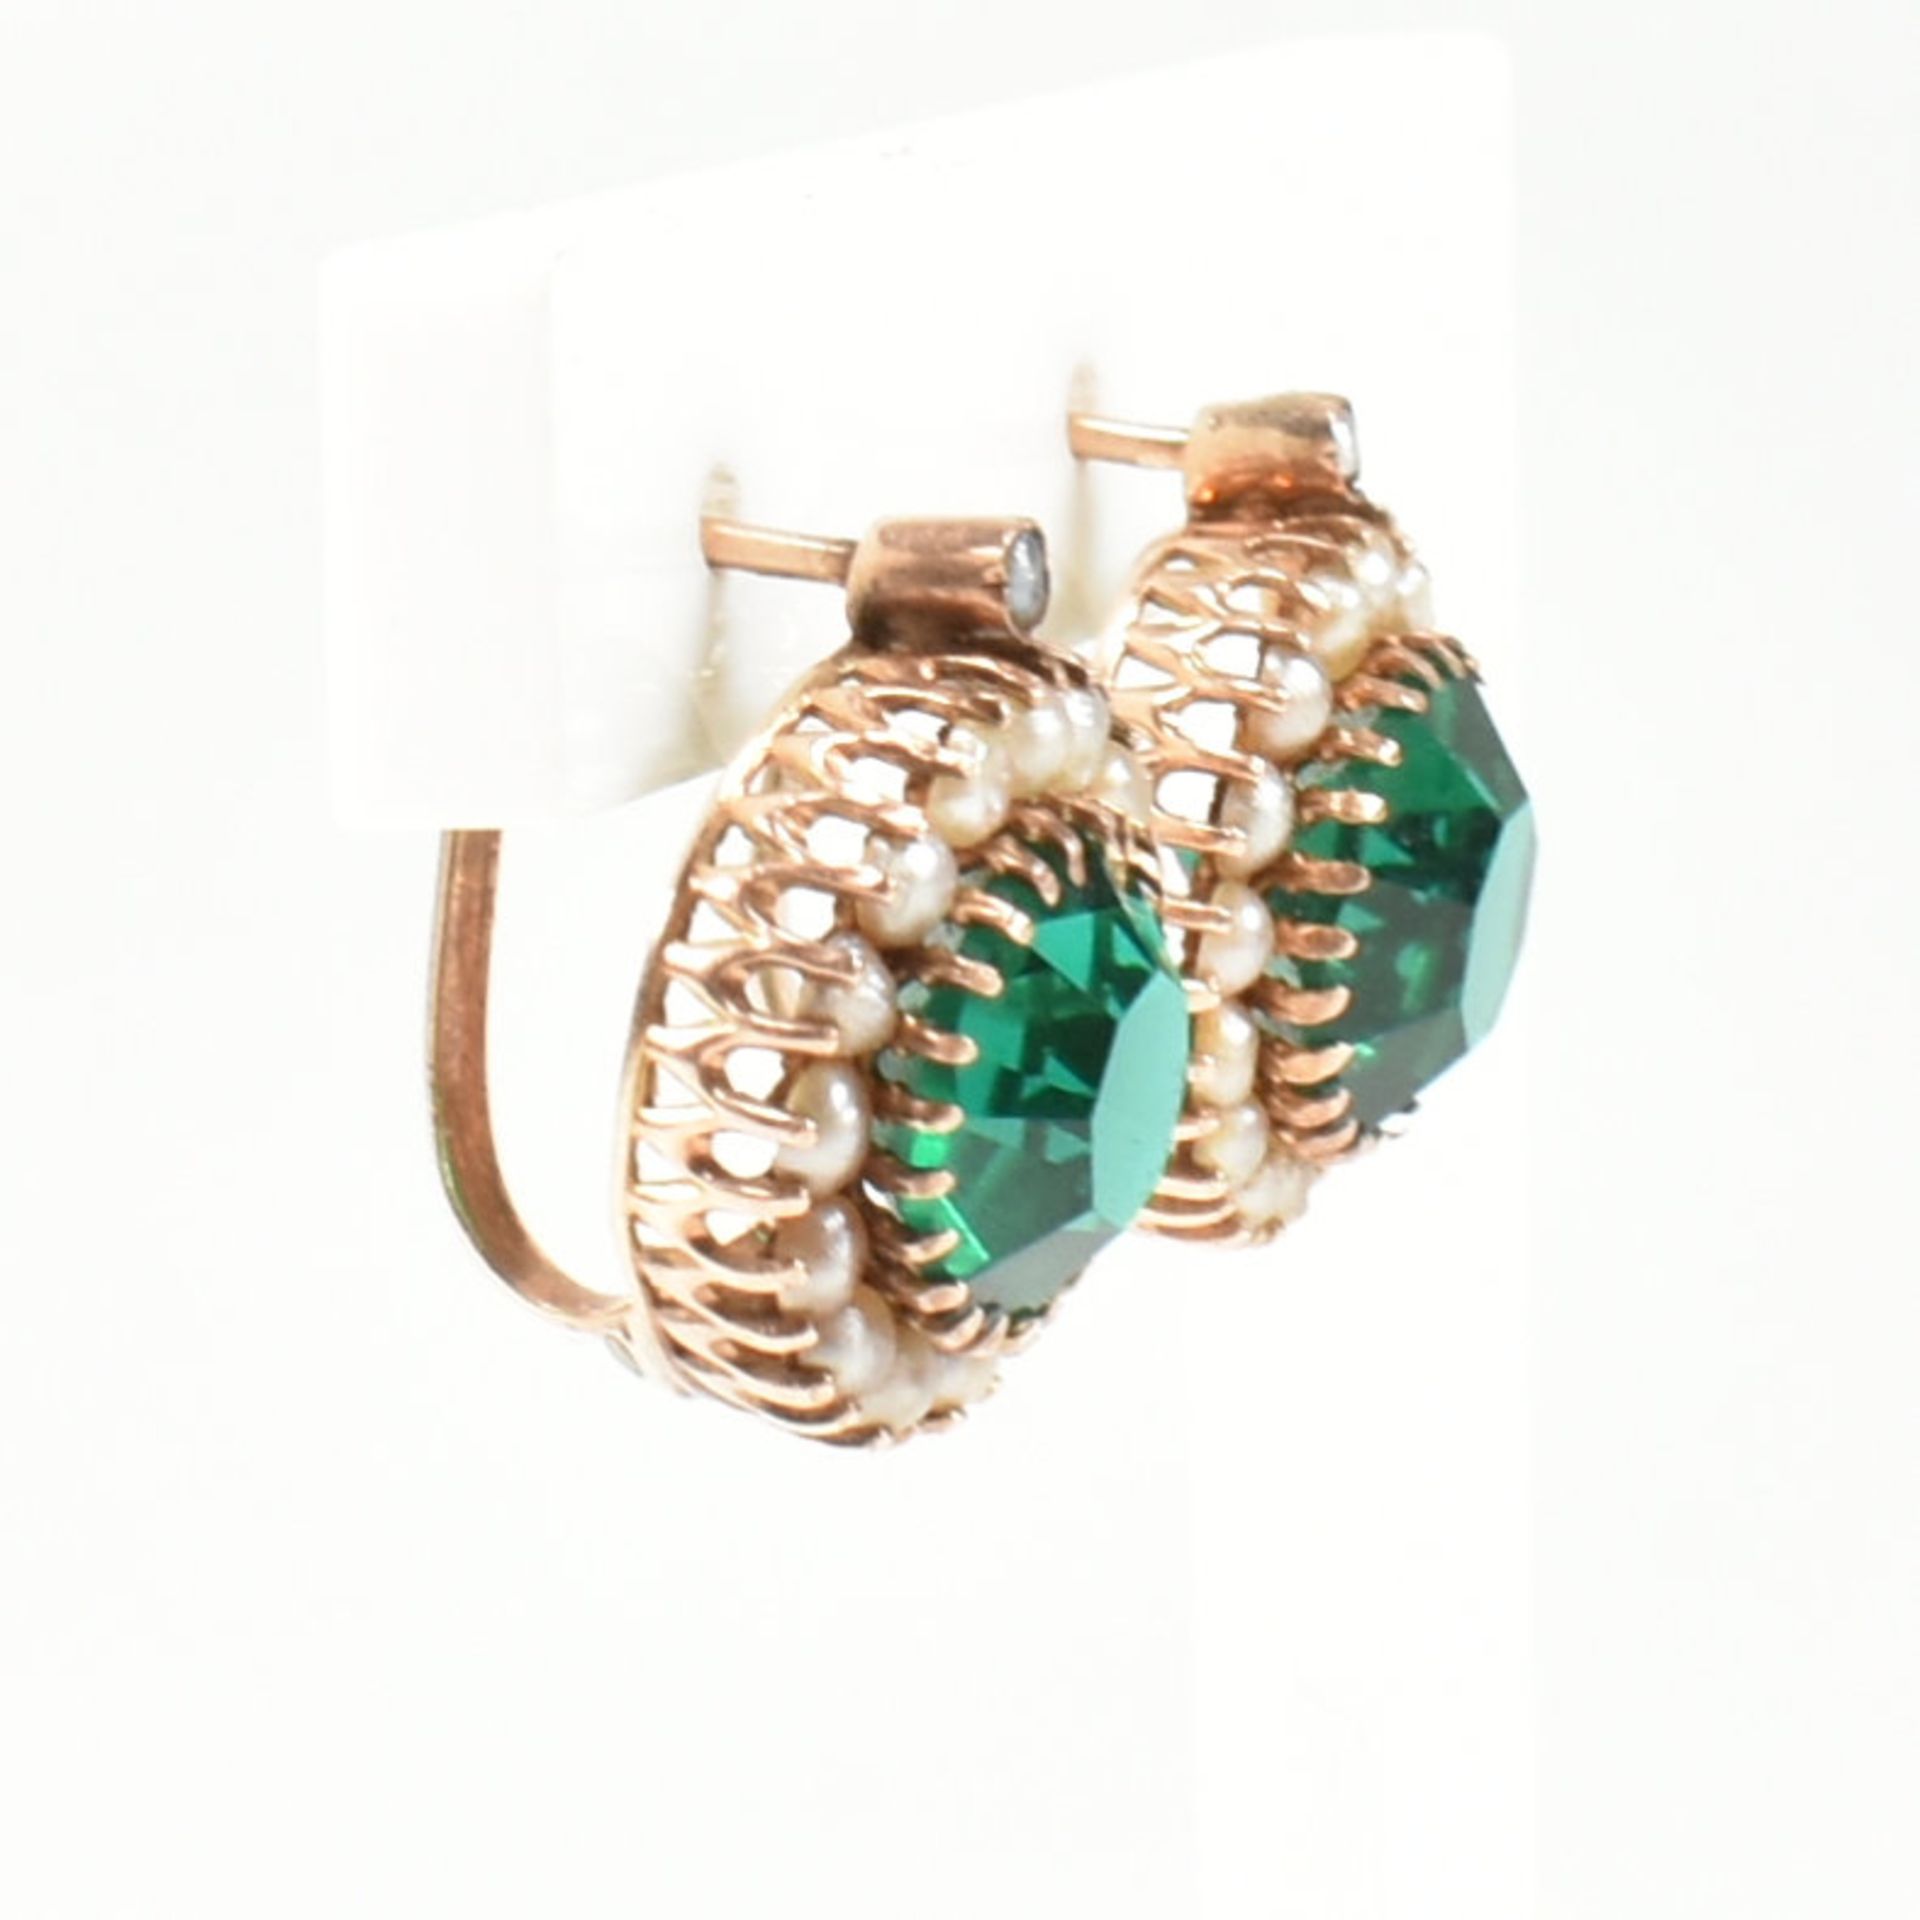 GOLD PEARL & GREEN PASTE EARRINGS - Image 6 of 7